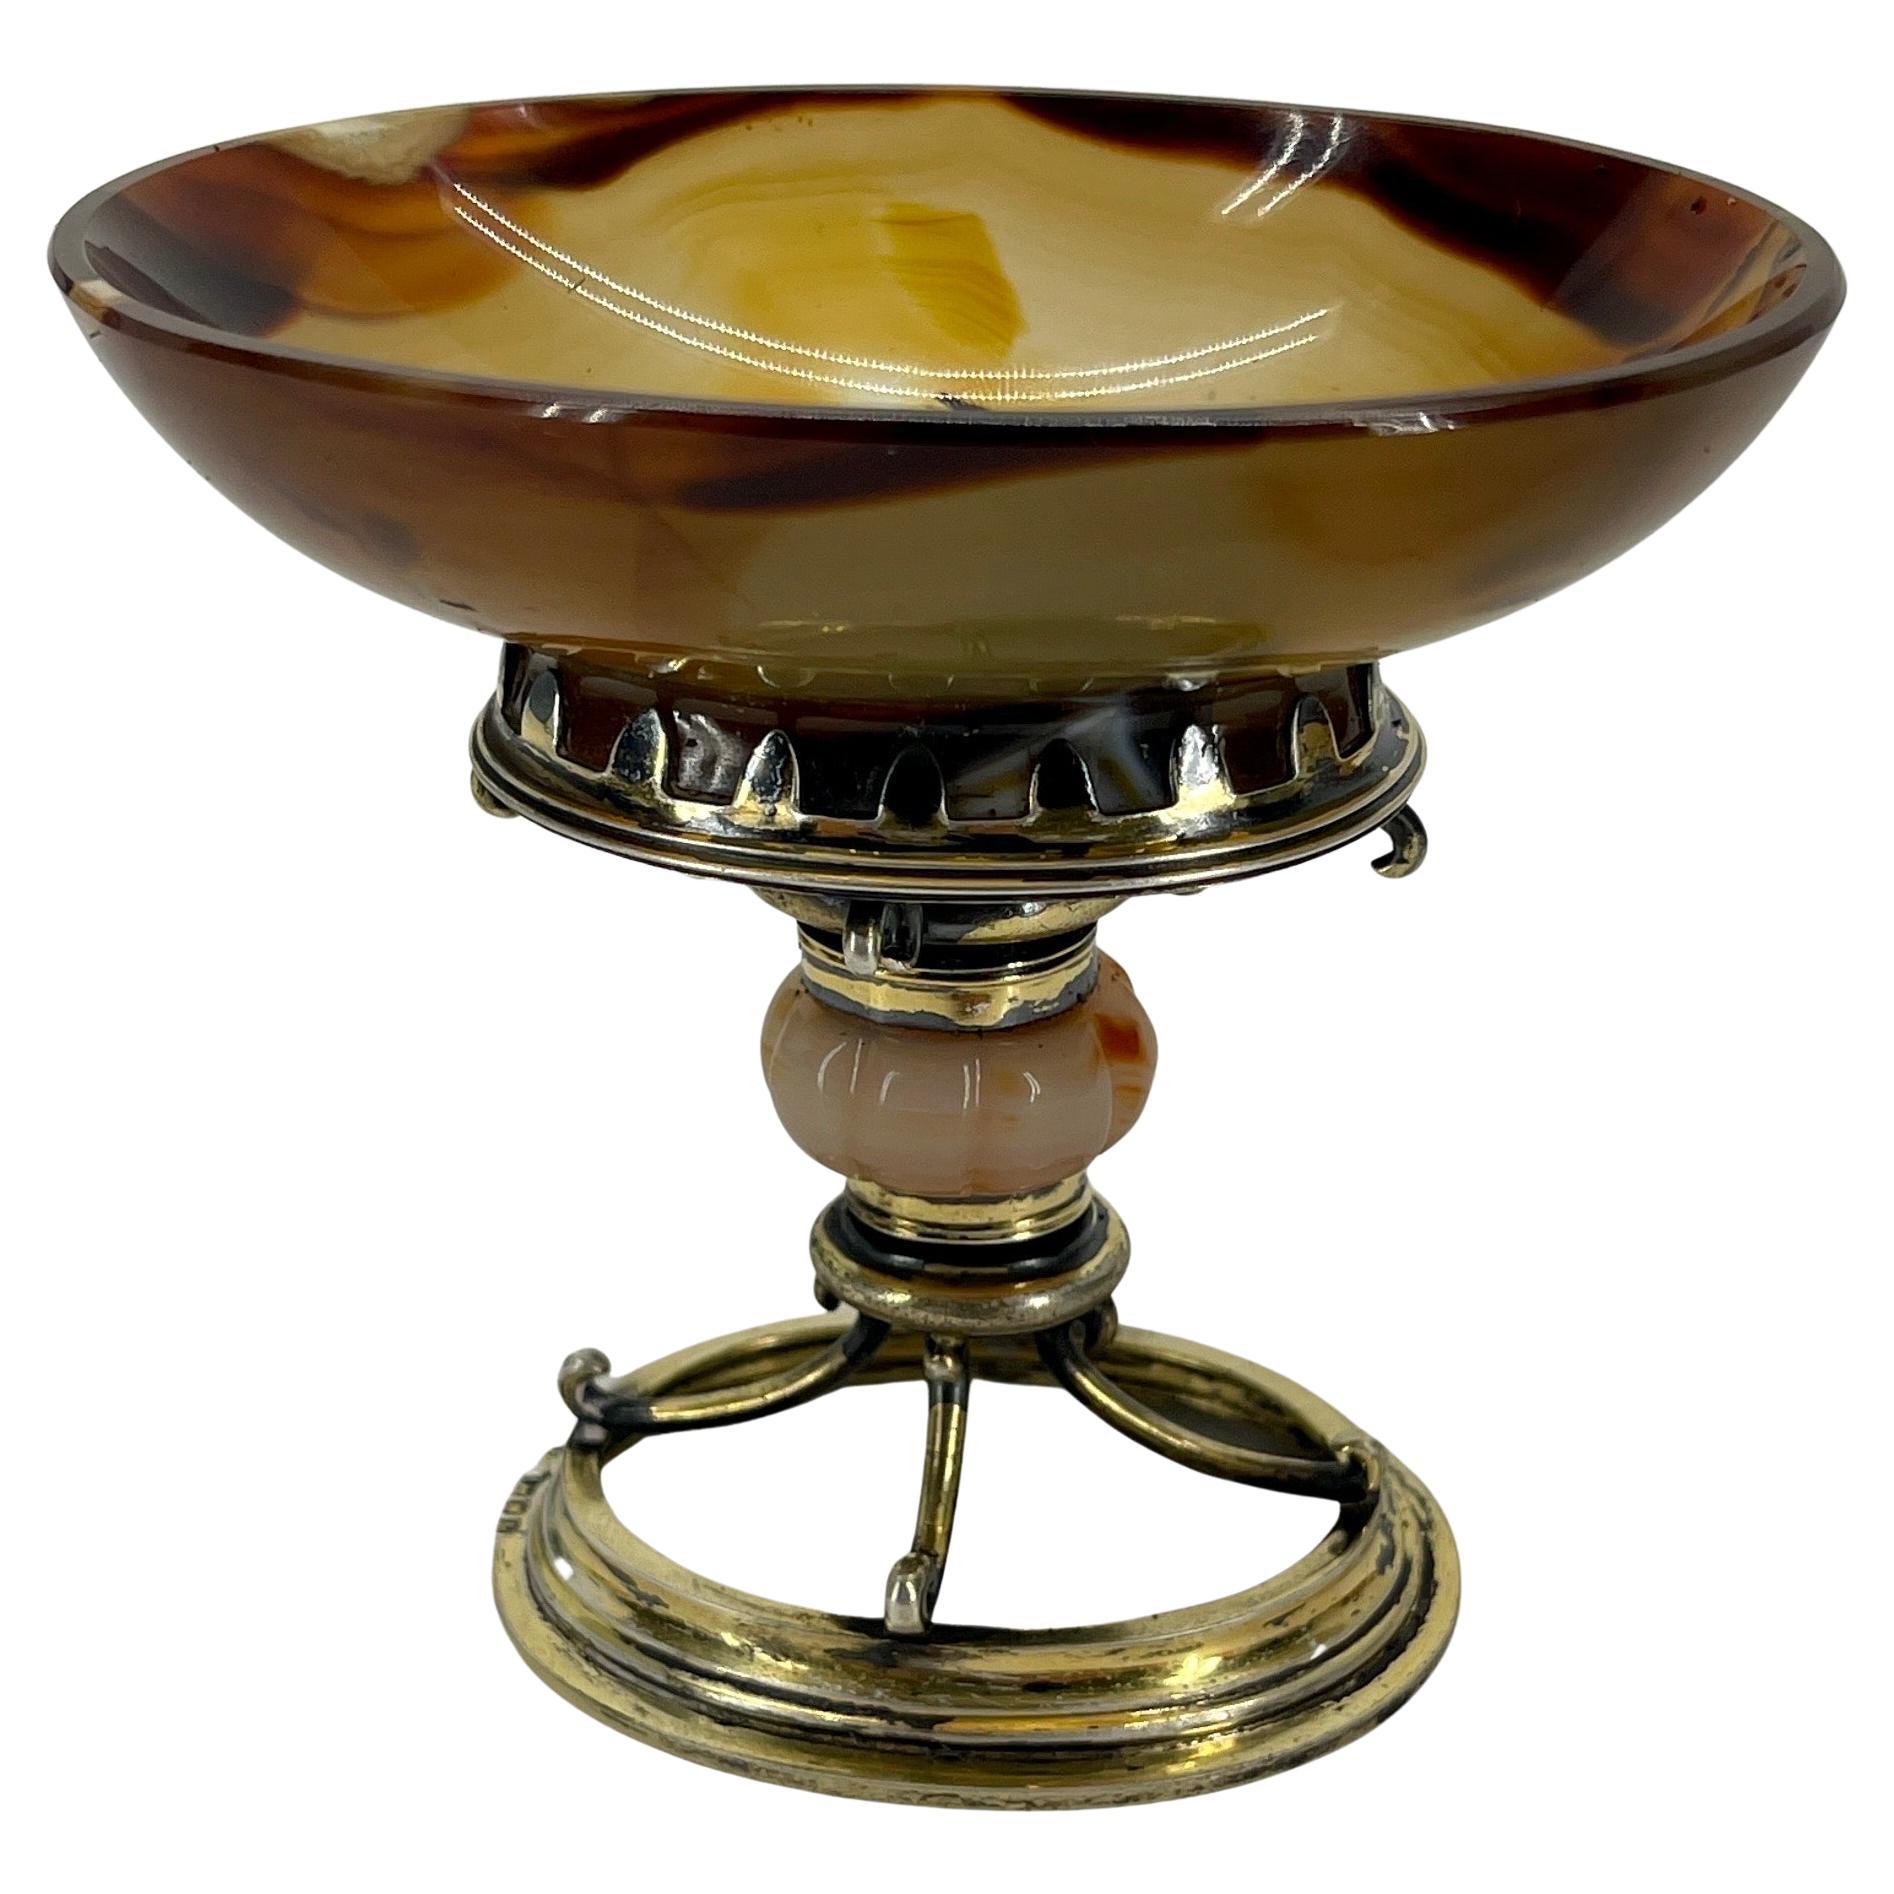 Antique Early 19th Century English Solid Gilt Sterling Silver and Agate Bowl. 
The silver base has high quality English silver stndard and master mark's. 
Please see images attached to this listing.
